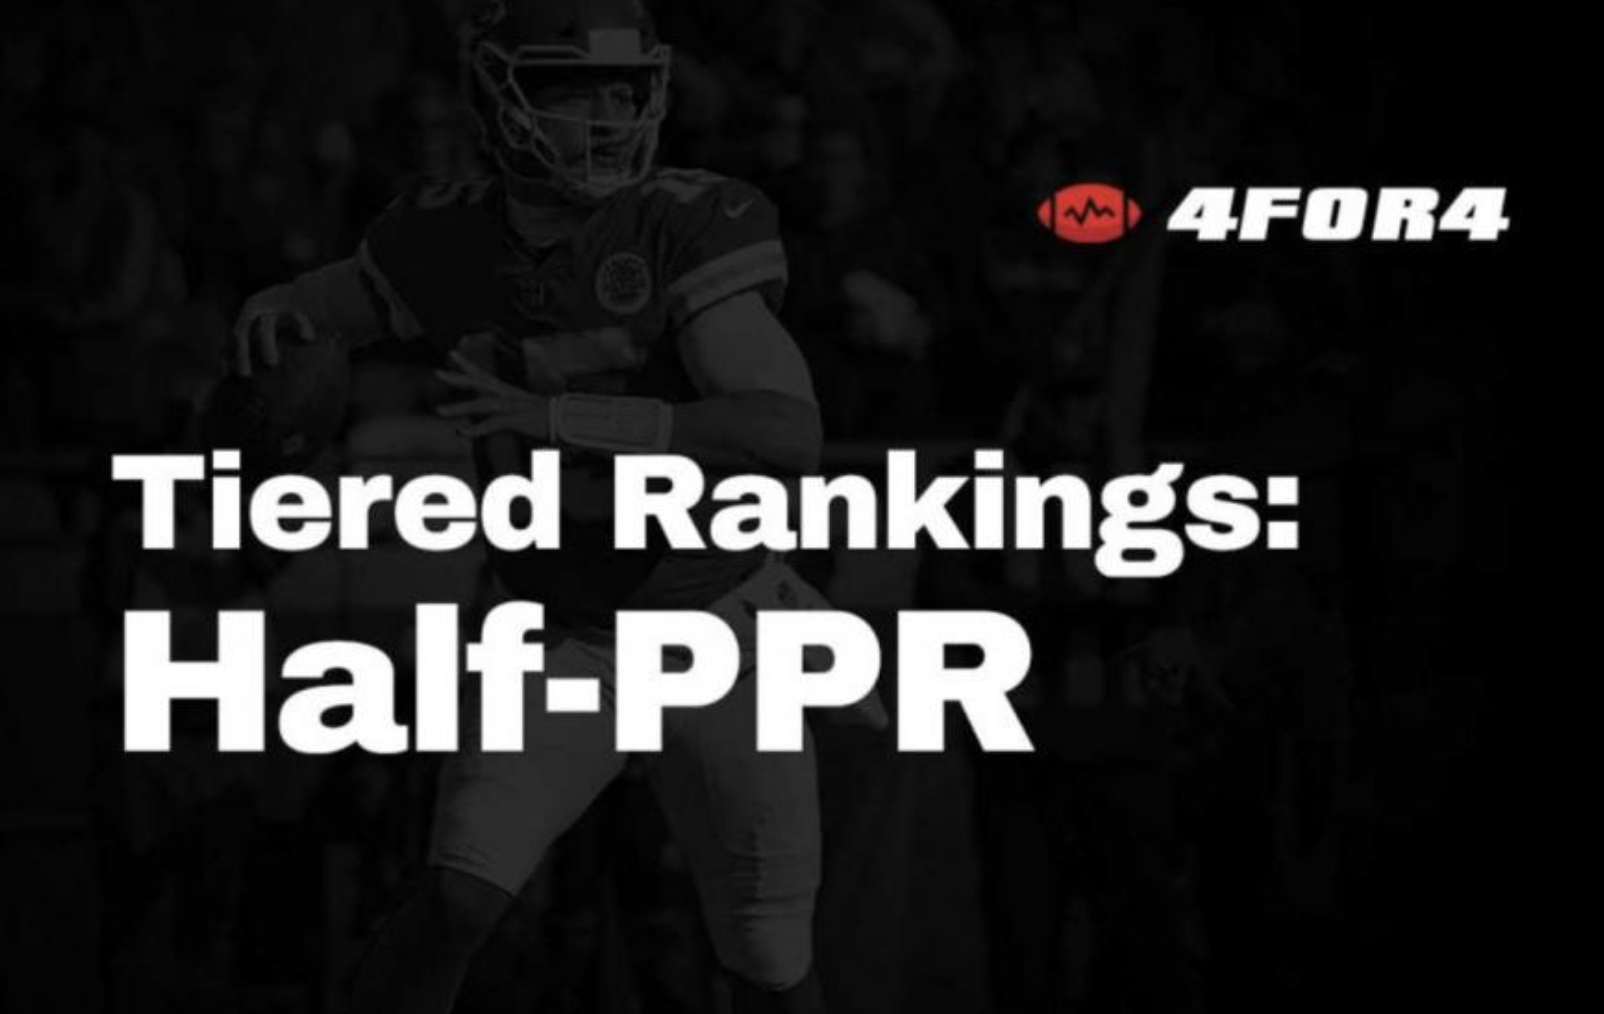 Tiered Rankings for Half-PPR Fantasy Football Leagues